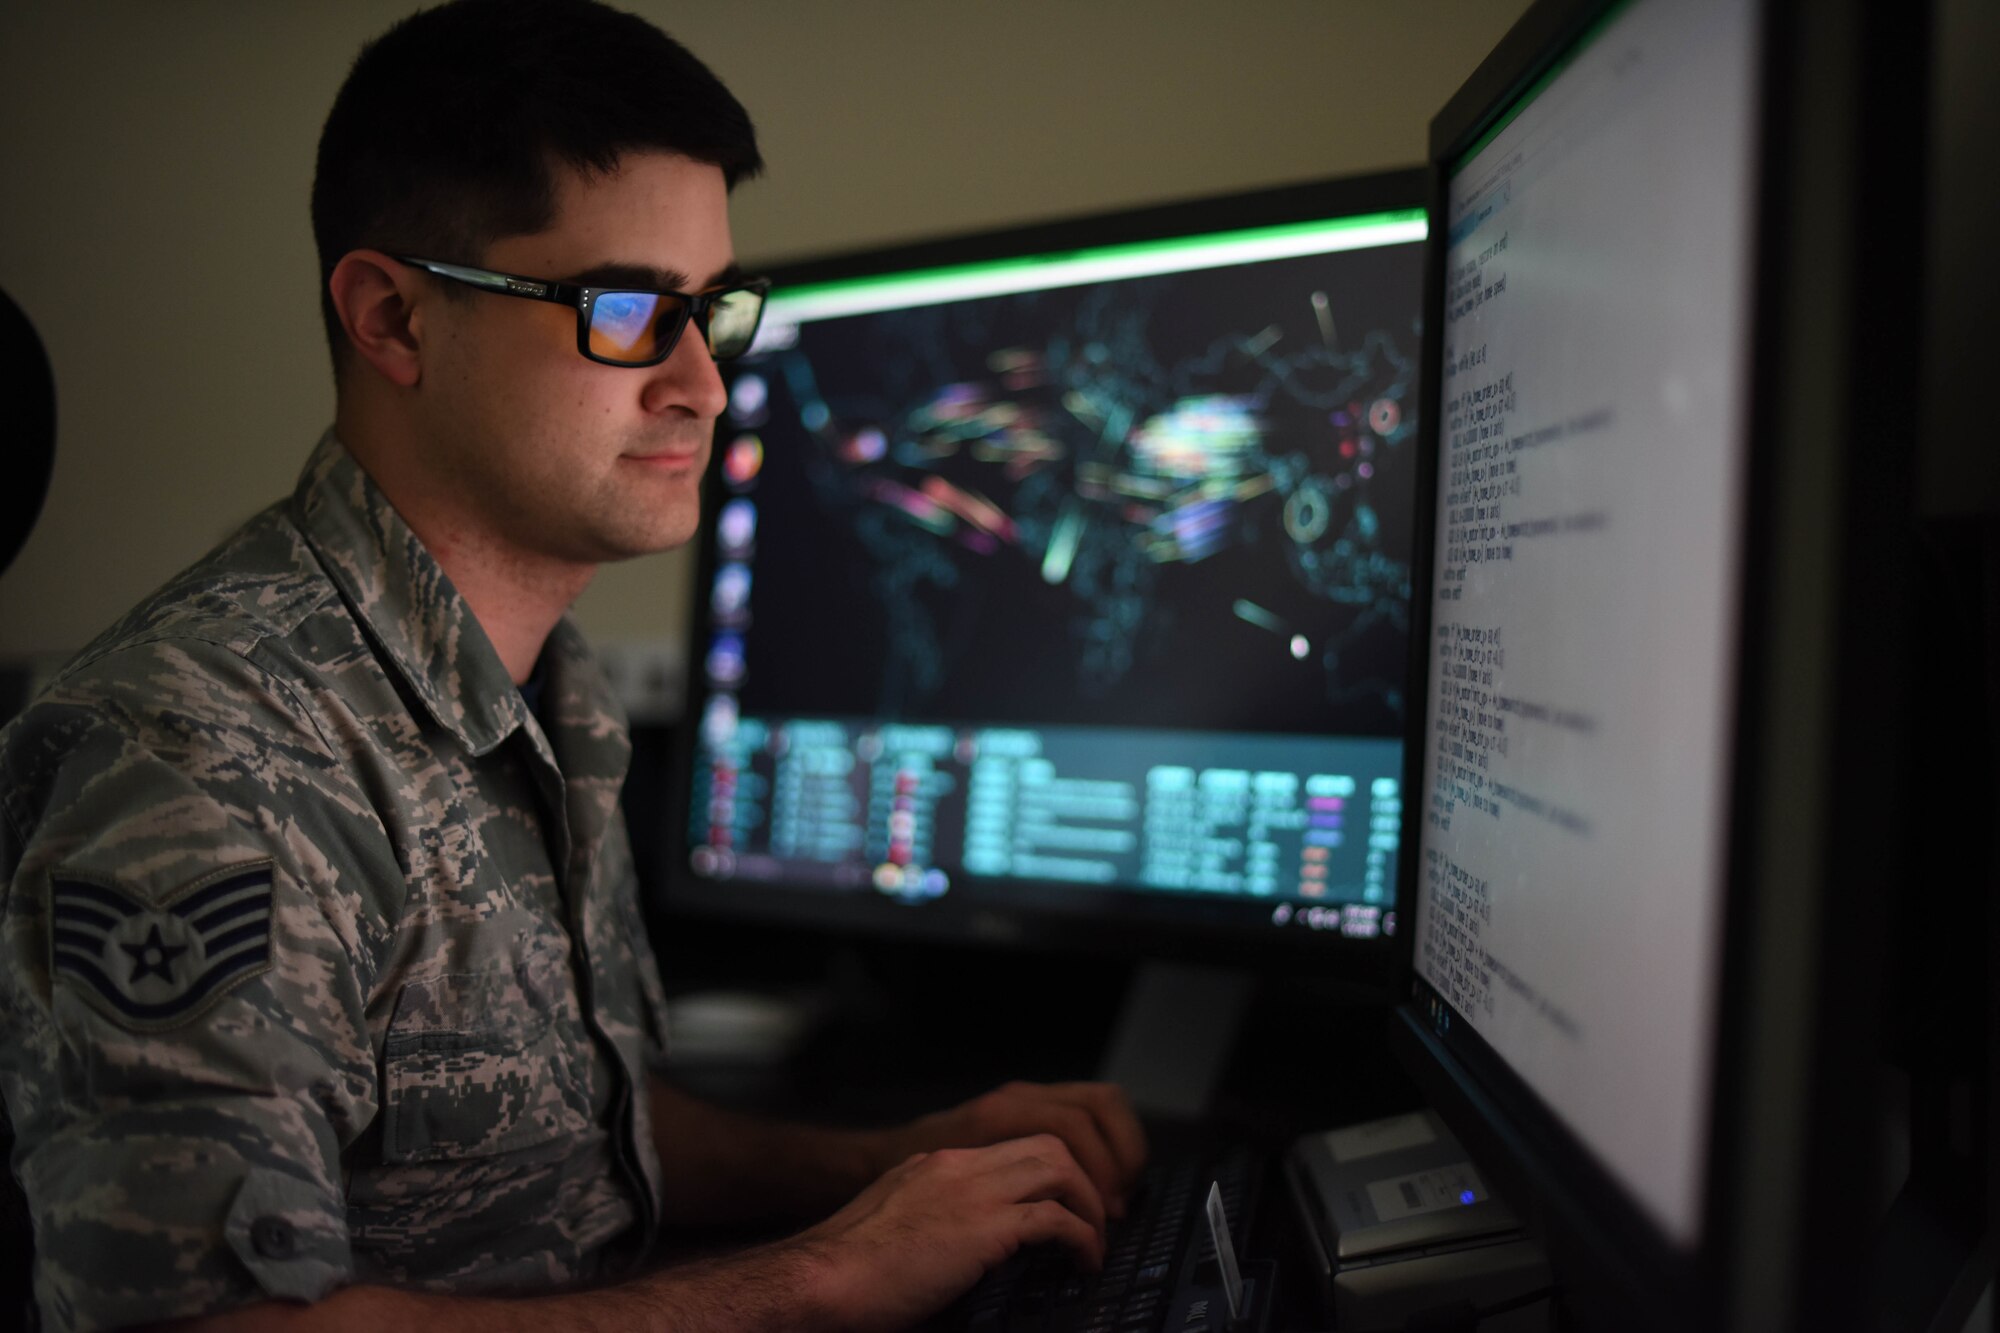 U.S. Air Force Staff Sgt. Caleb uses a computer programs to identify network issues during his unit's training period at Berry Field Air National Guard Base, Nashville, Tenn.